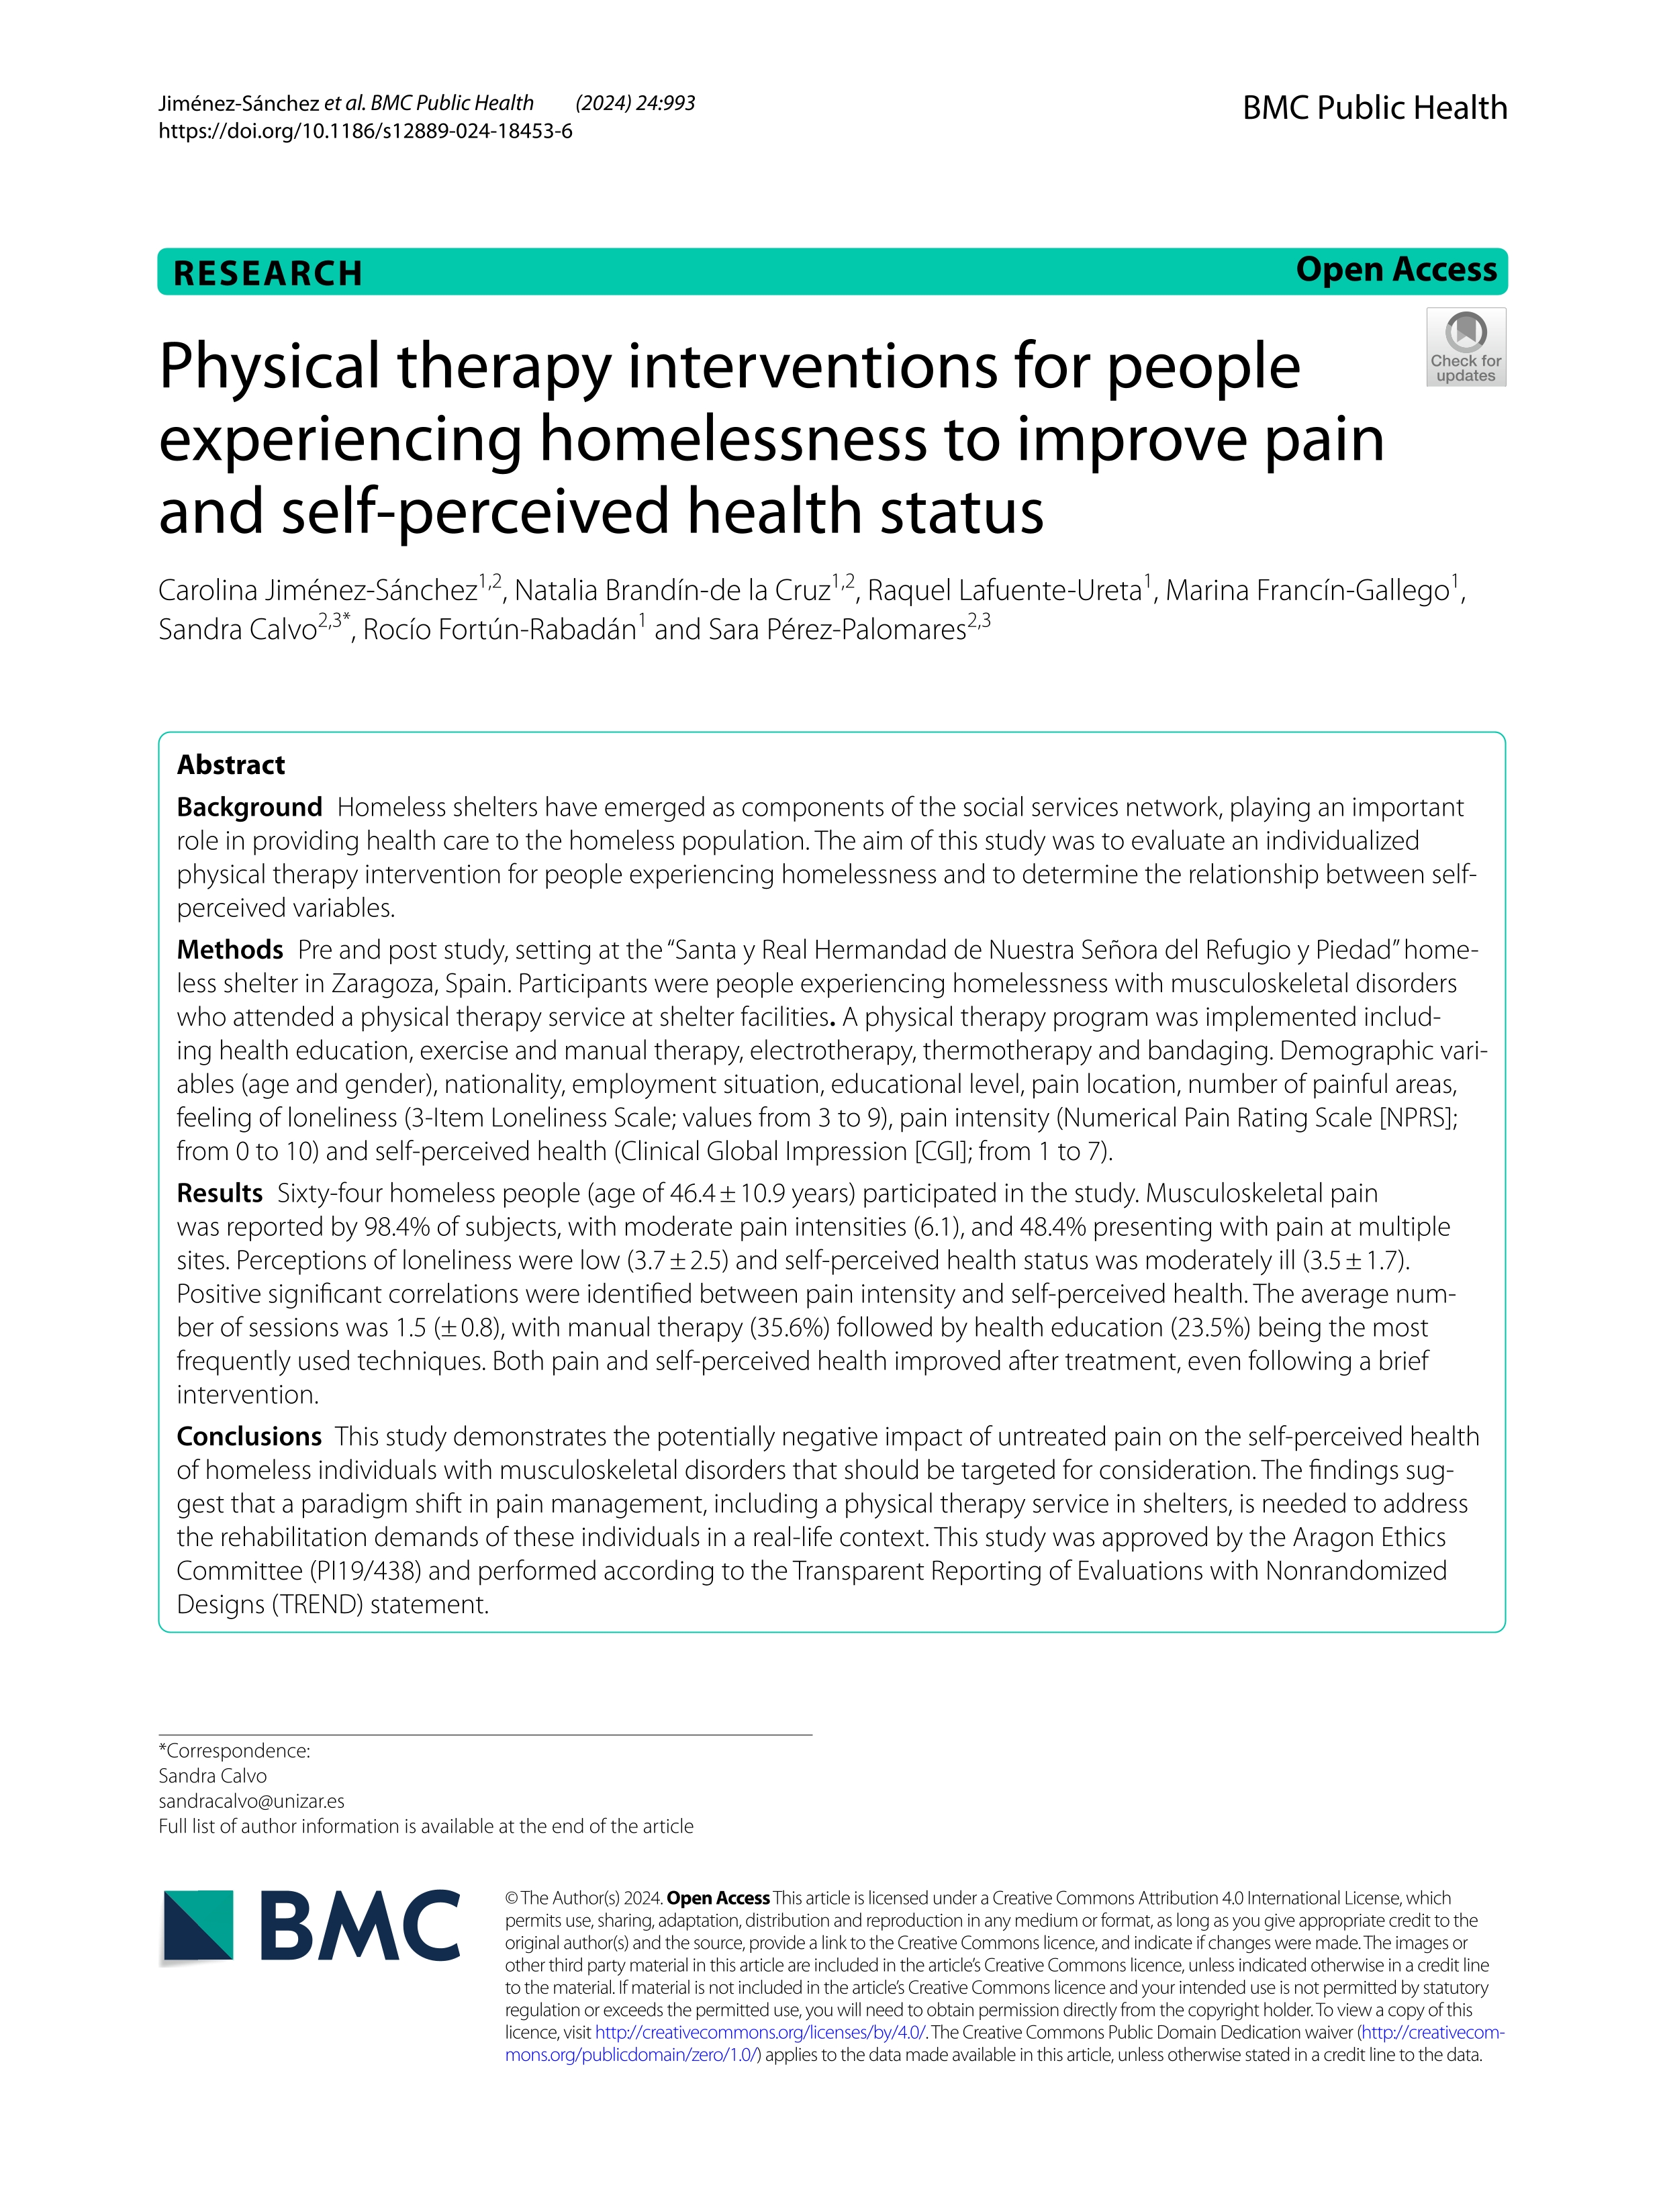 Physical therapy interventions for people experiencing homelessness to improve pain and self-perceived health status